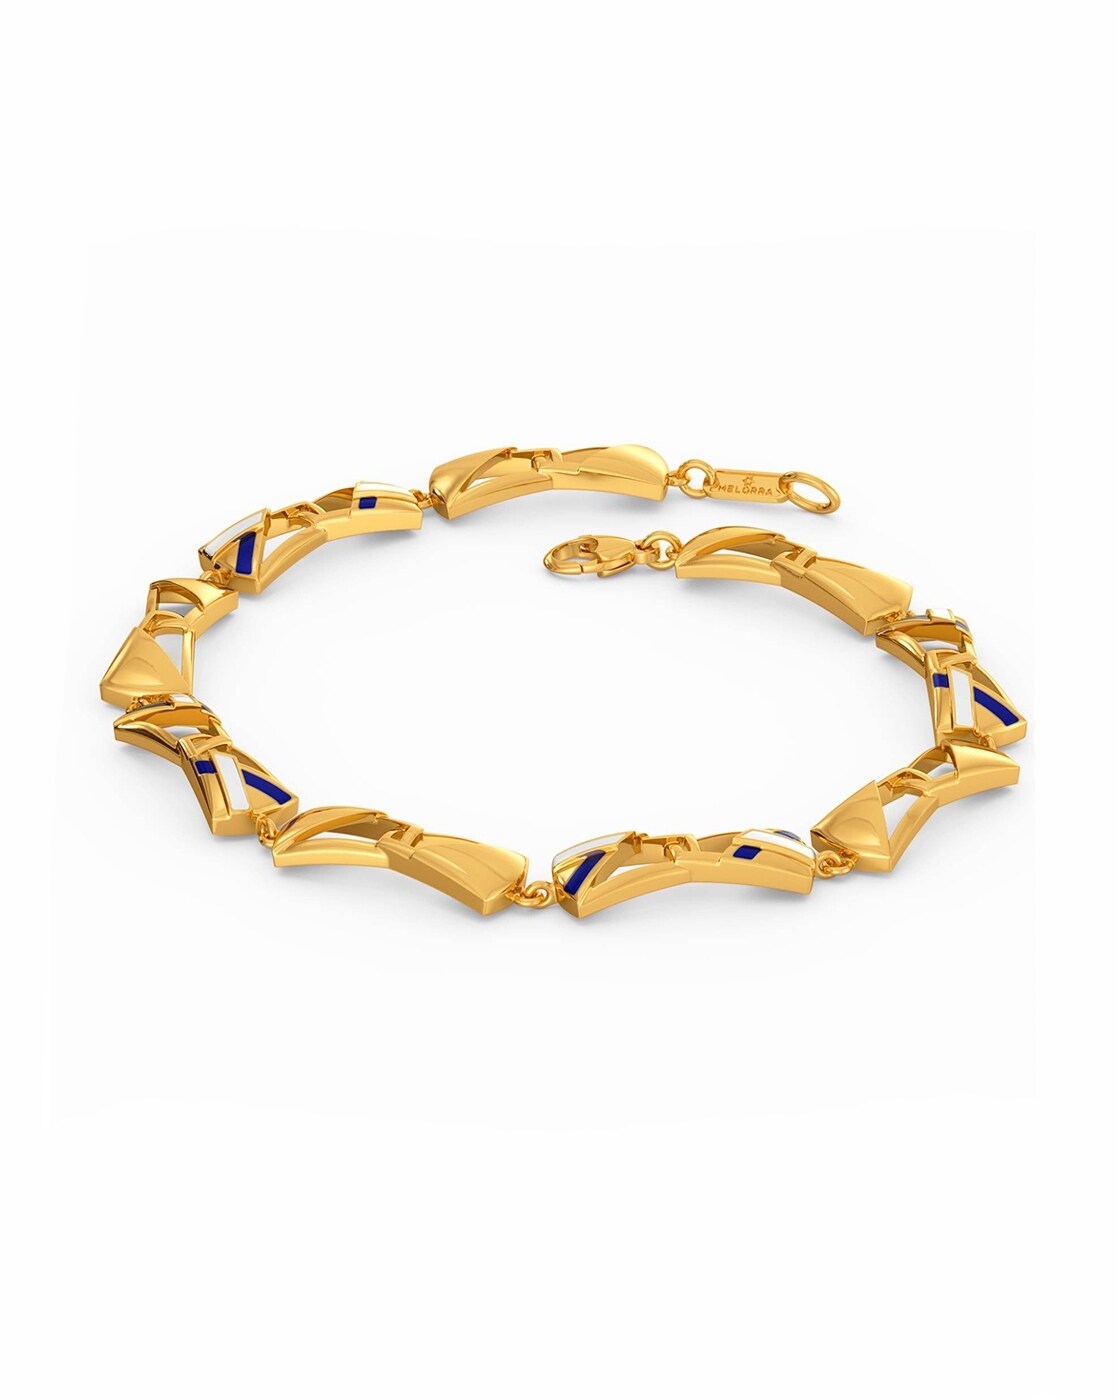 Buy MELORRA 18 KT Thorn O Rouge Gold Bracelet Yellow Gold at Amazon.in